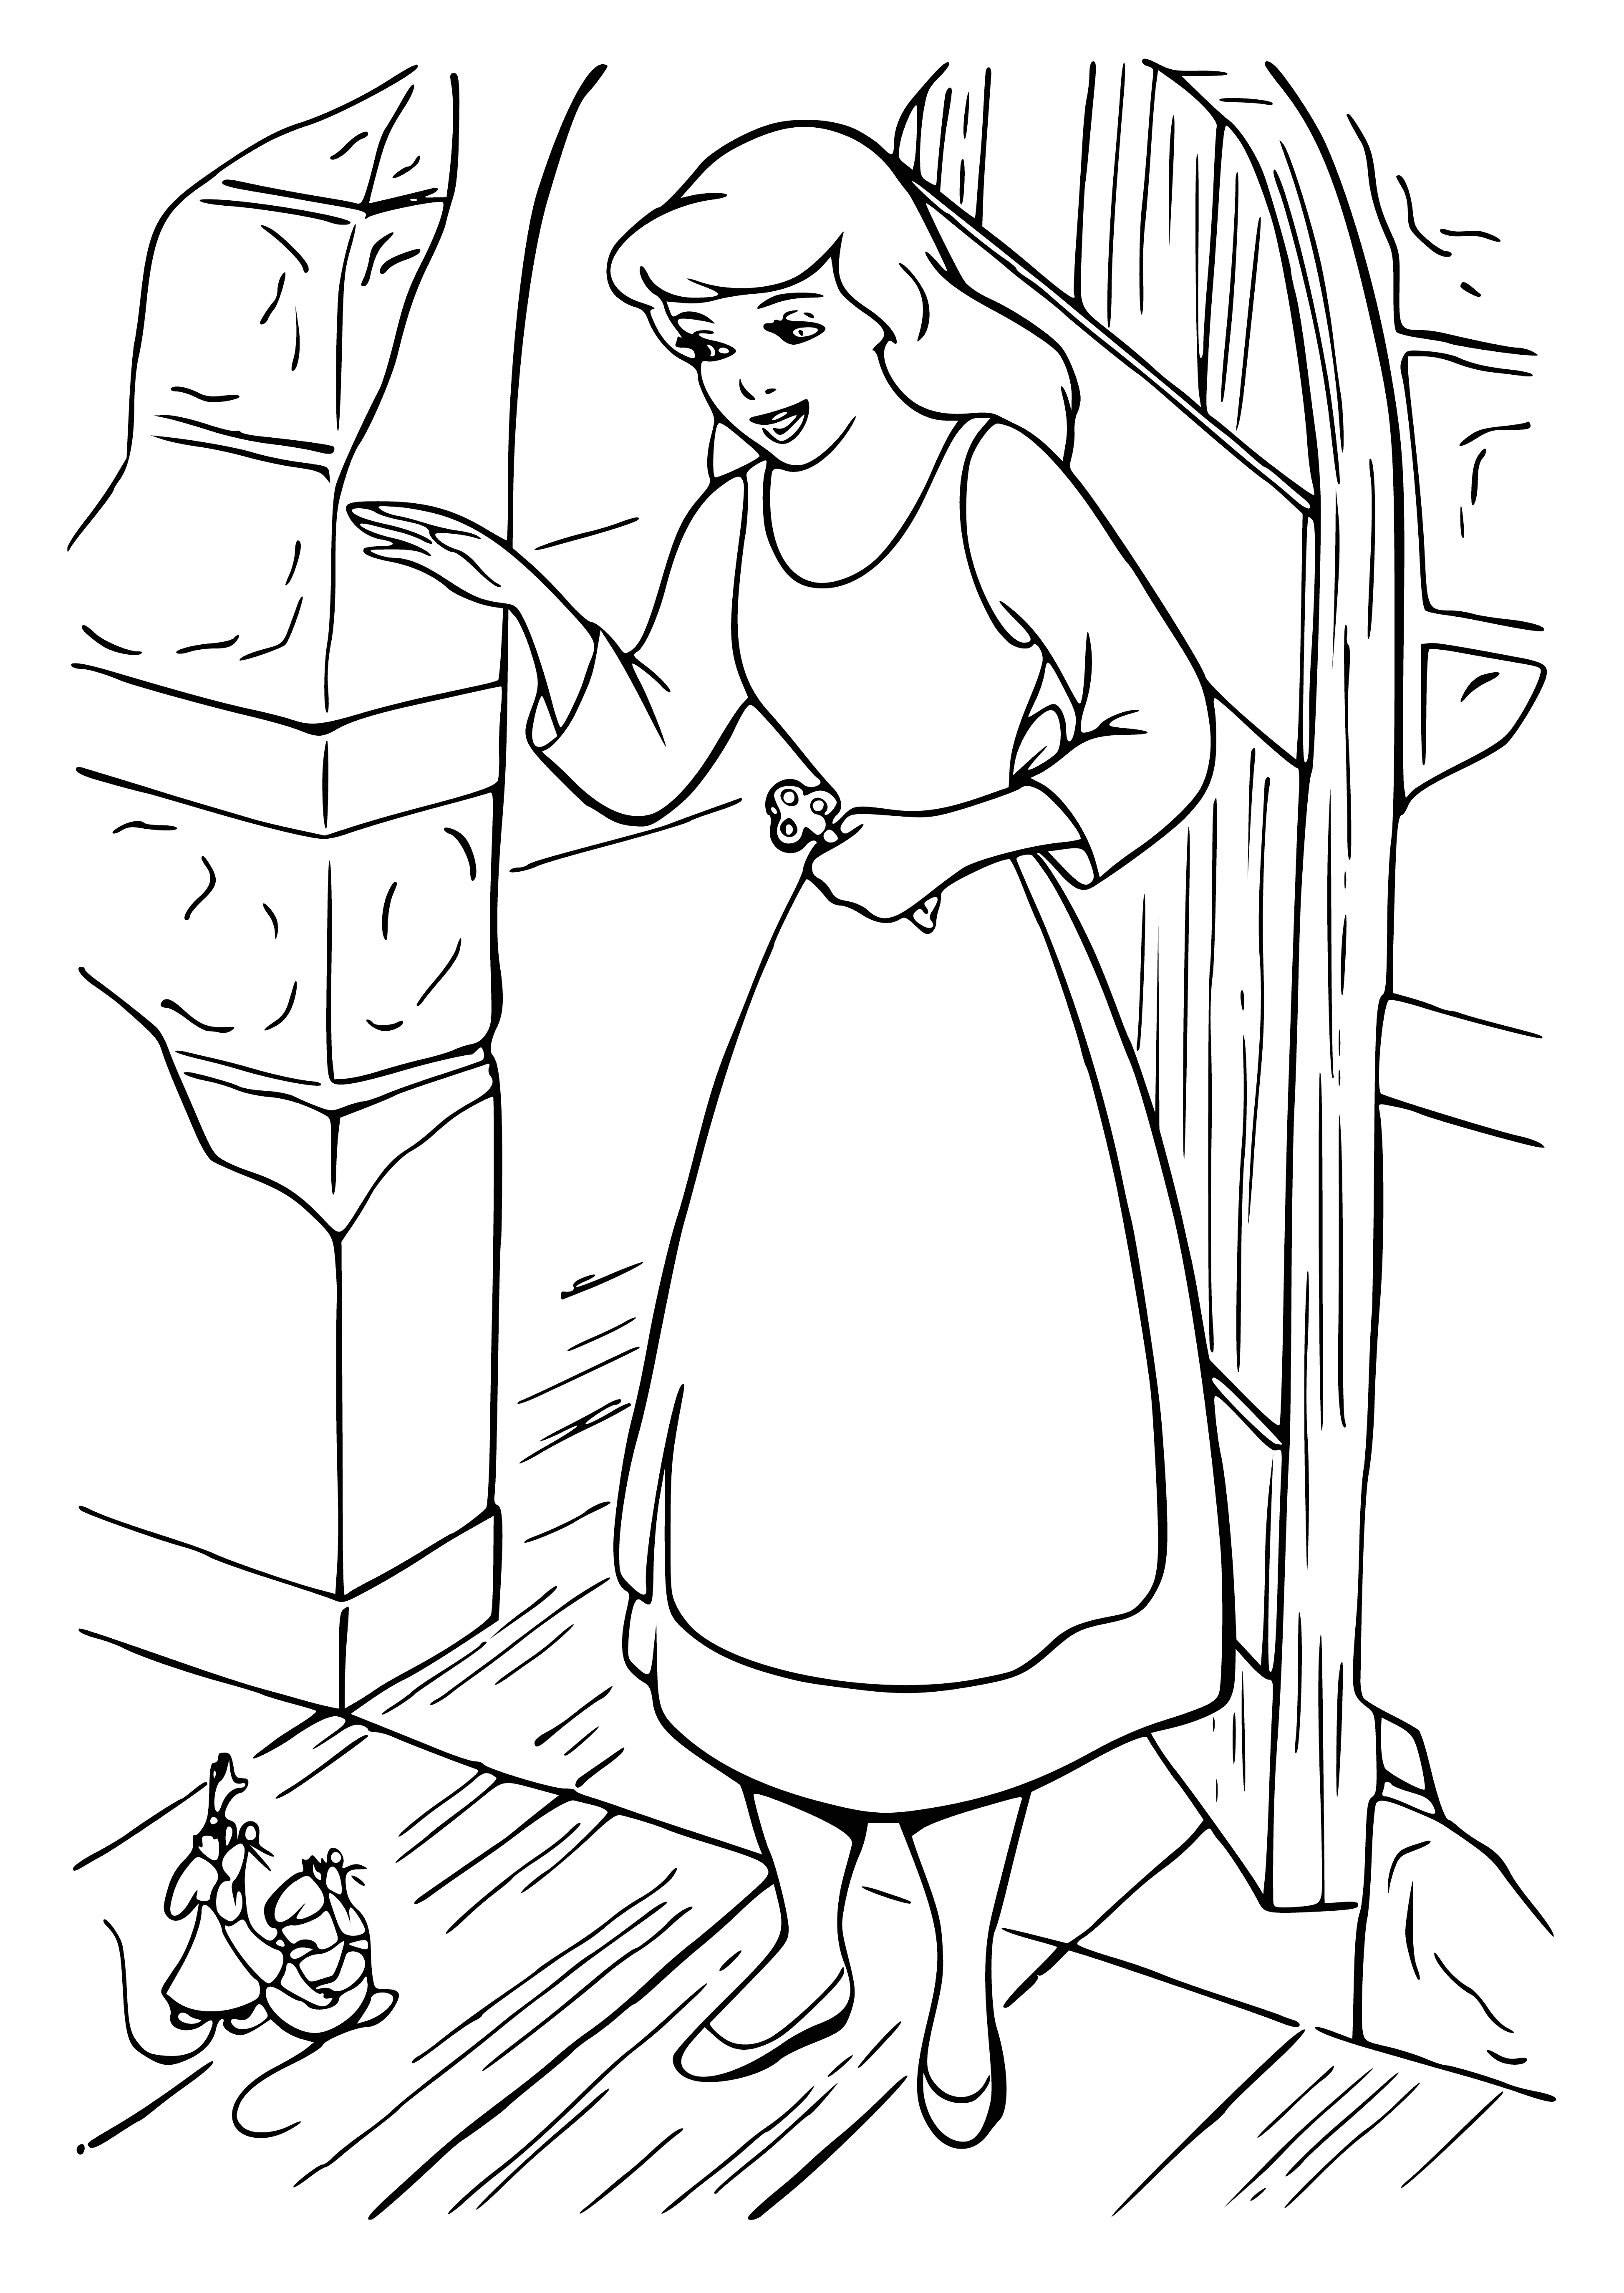 coloring page: Two angry men ready to fight in foreground with a scared looking woman in a dirty dress in the background - Cinderella?